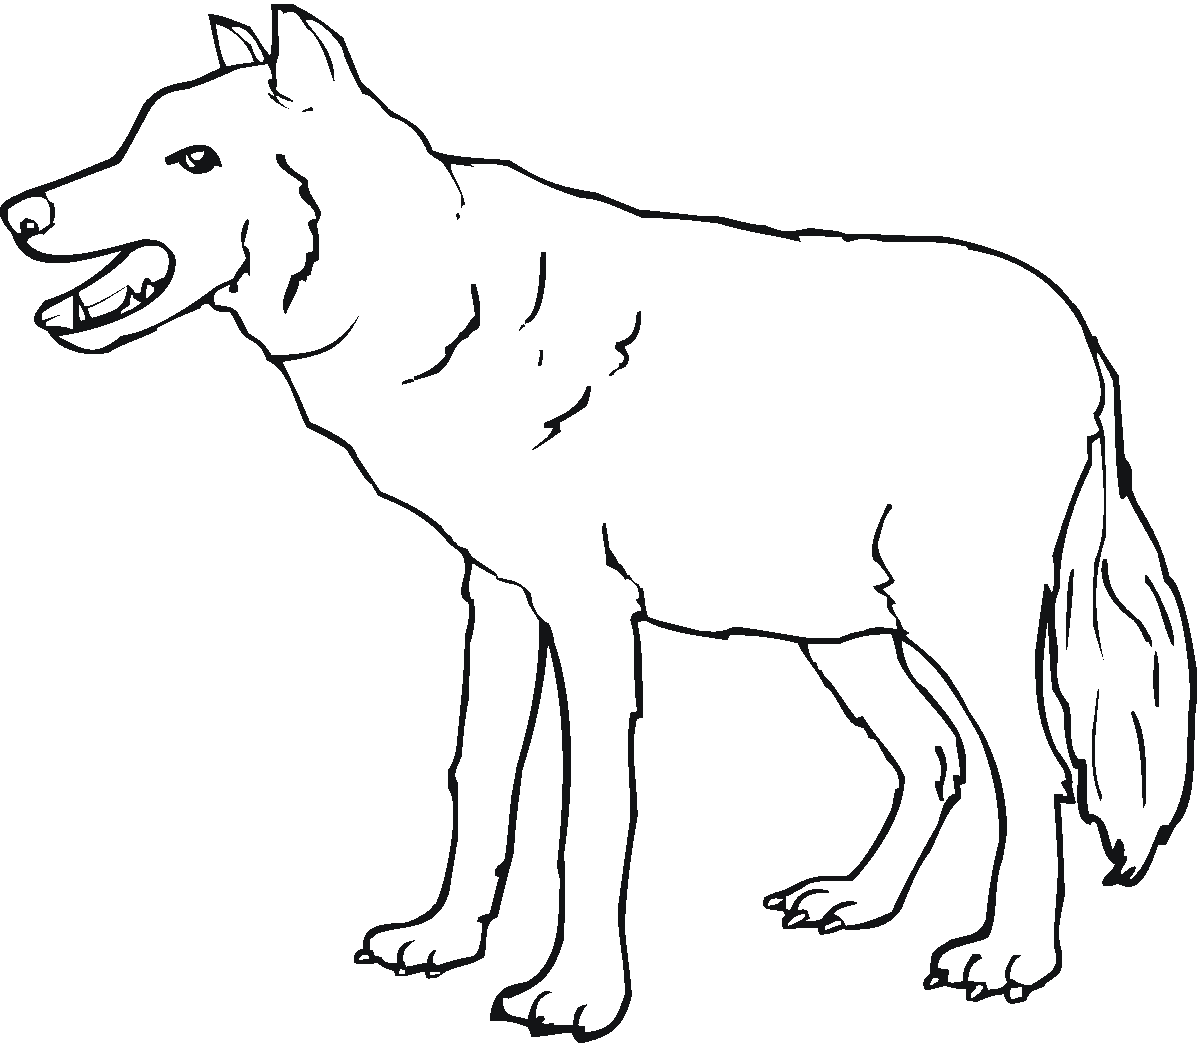 Gray Wolf coloring #18, Download drawings